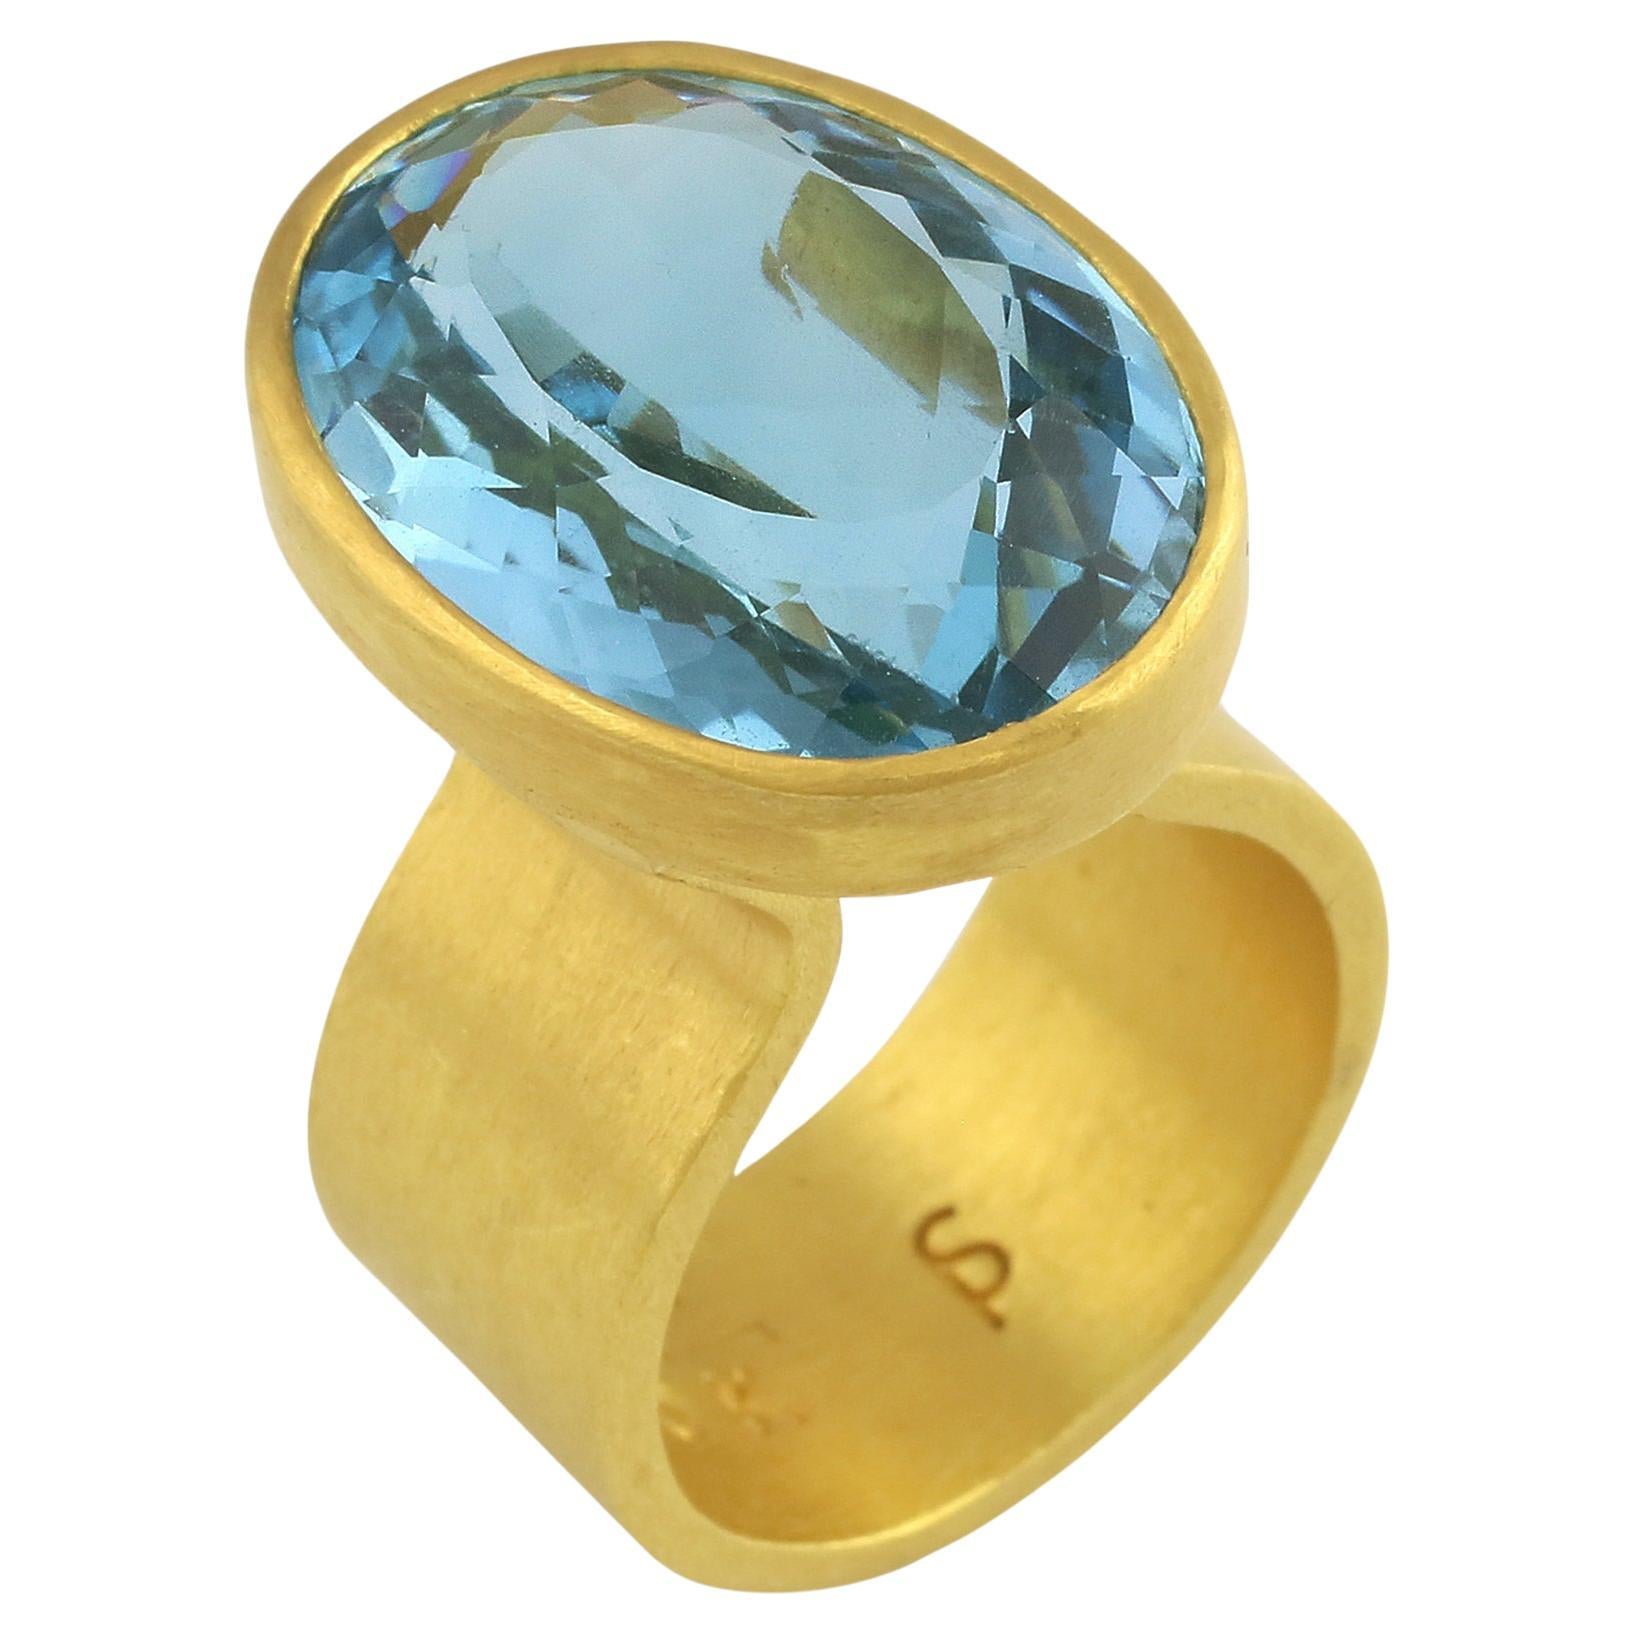 PHILIPPE SPENCER 19.25 Ct. Blue Topaz in 22K and 20K Gold Statement Ring